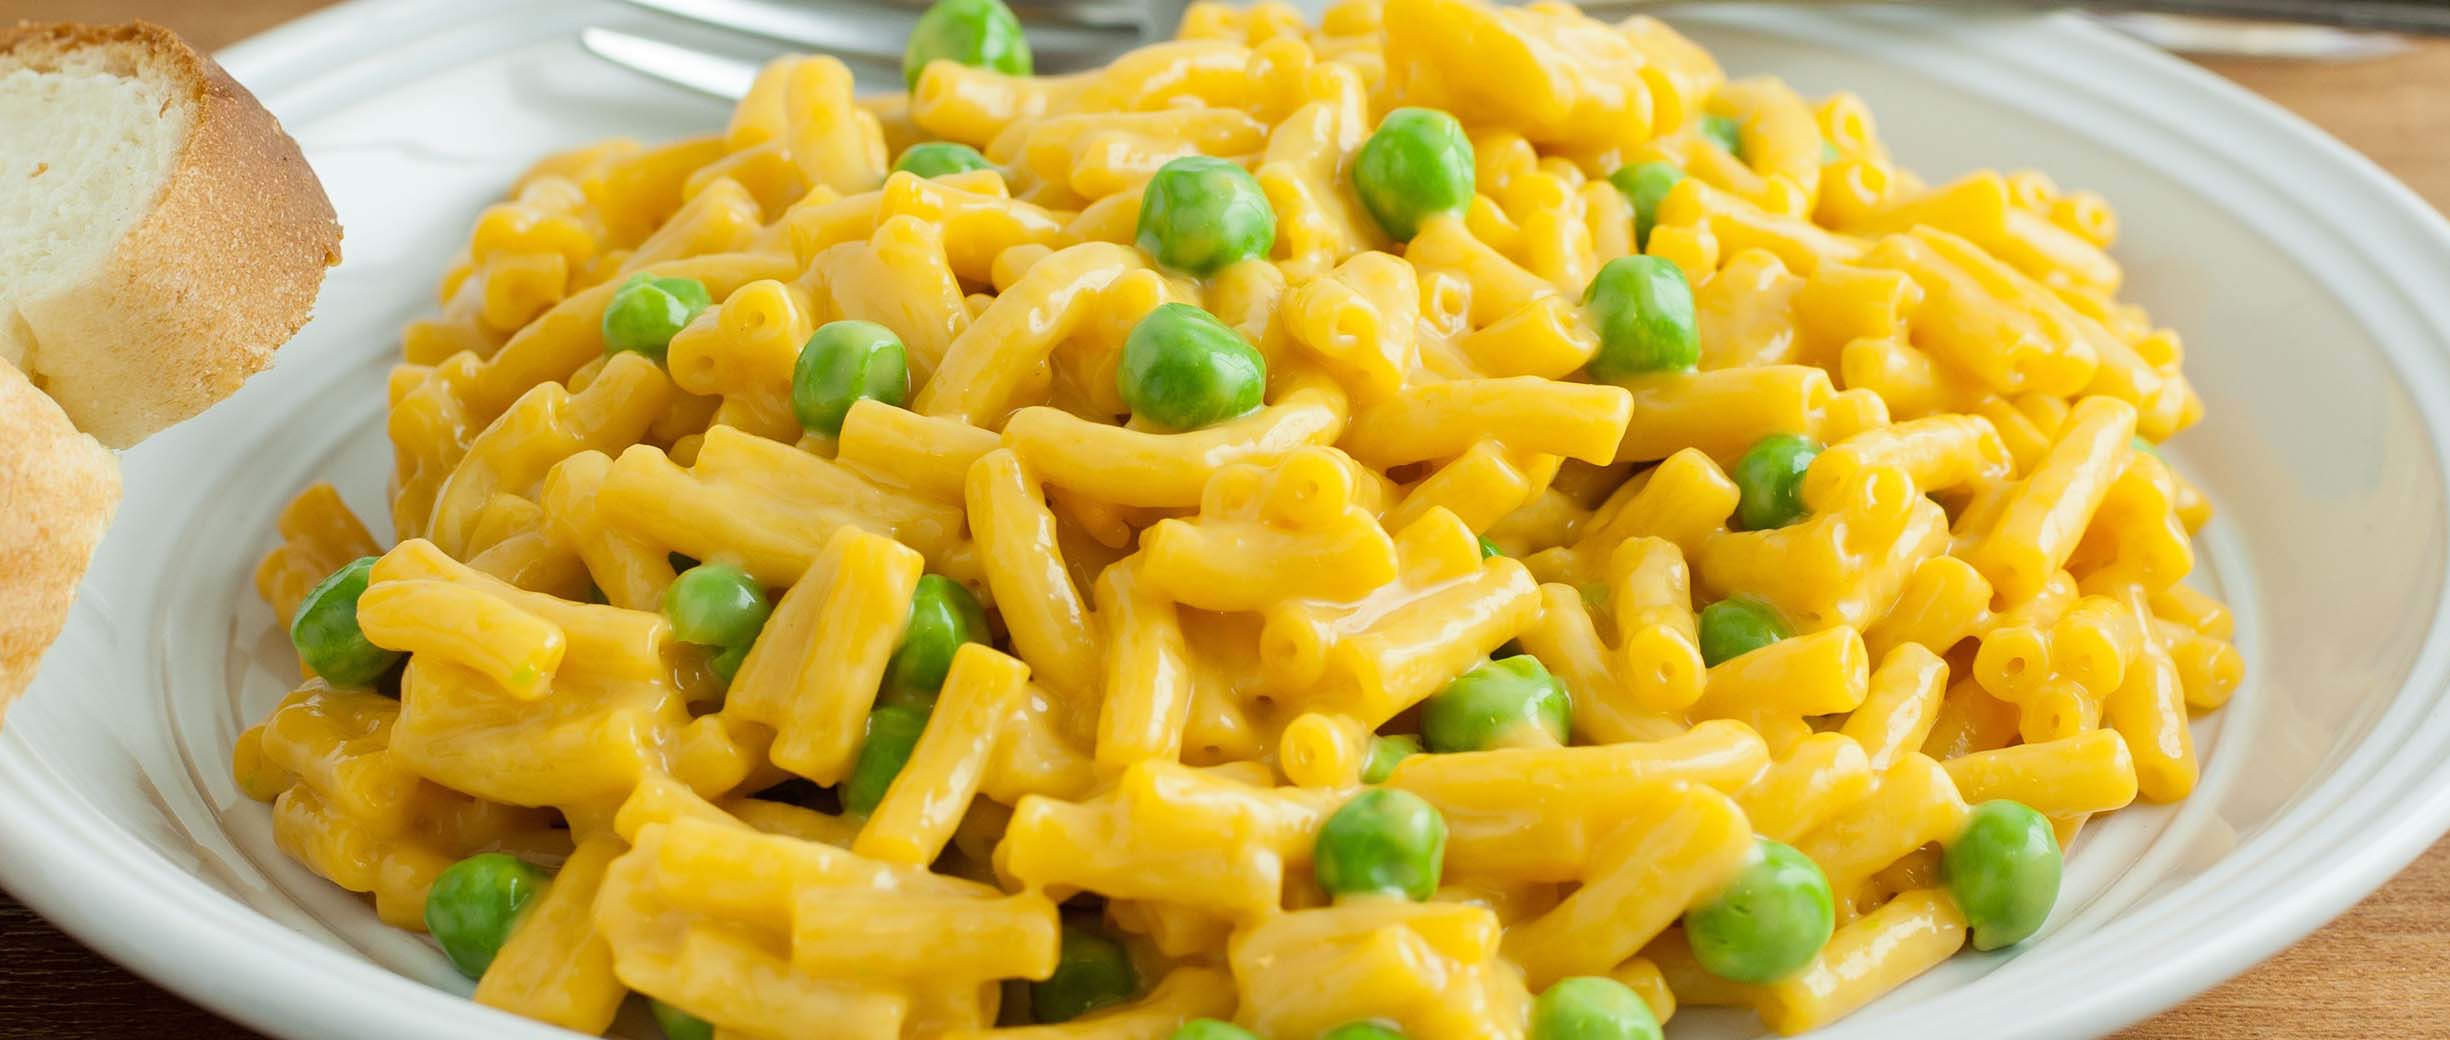 Healthier Takes on Mac & Cheese That Kids Won’t Hate